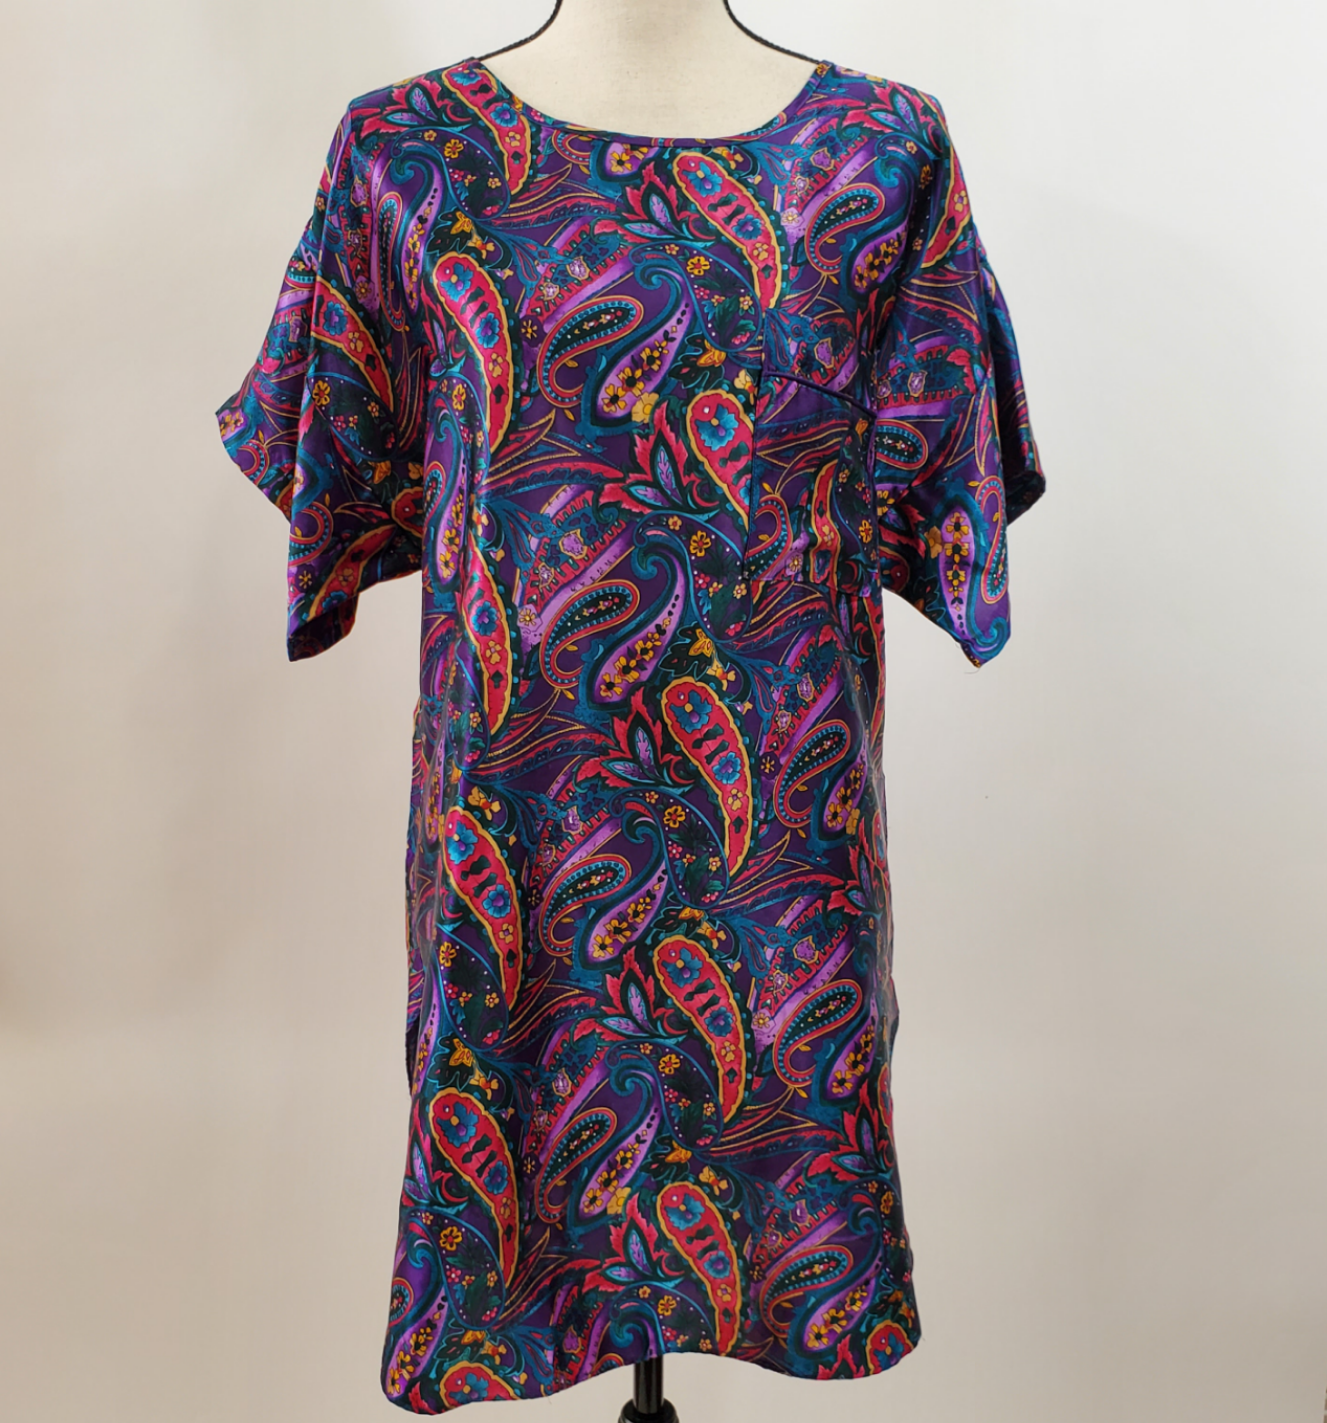 Vintage Adonna Satin Nightgown Purple Paisley Print Size Small Made in the USA